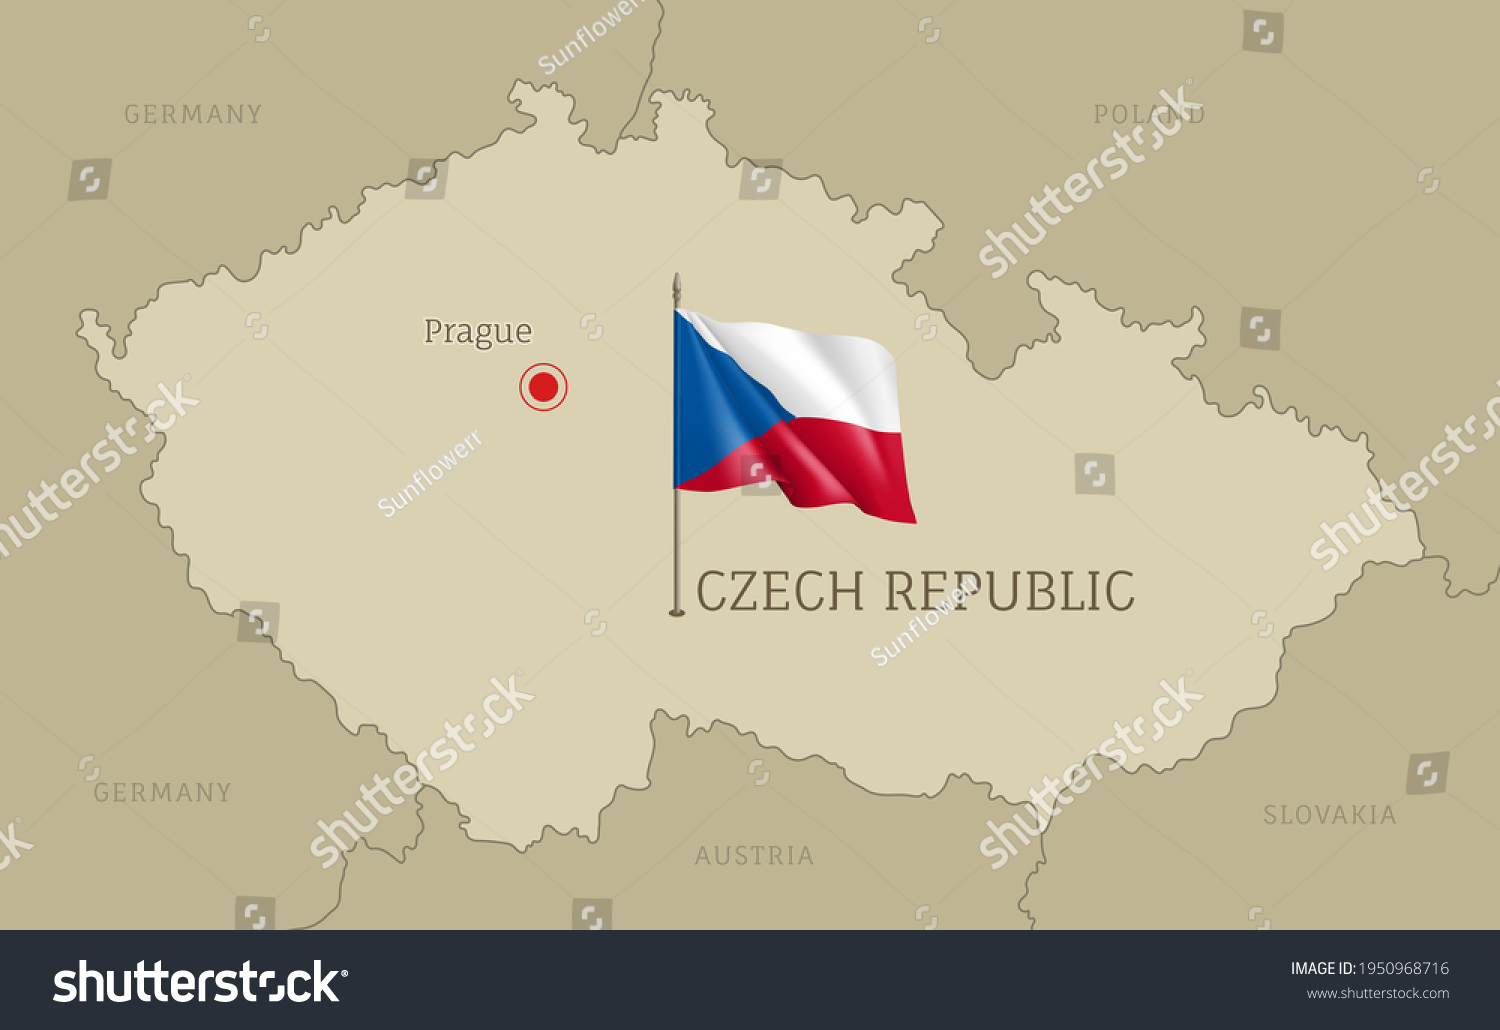 Stock Vector Detailed Map Of Czech Republic Territory Borders East European Country Administrative Map With 1950968716 